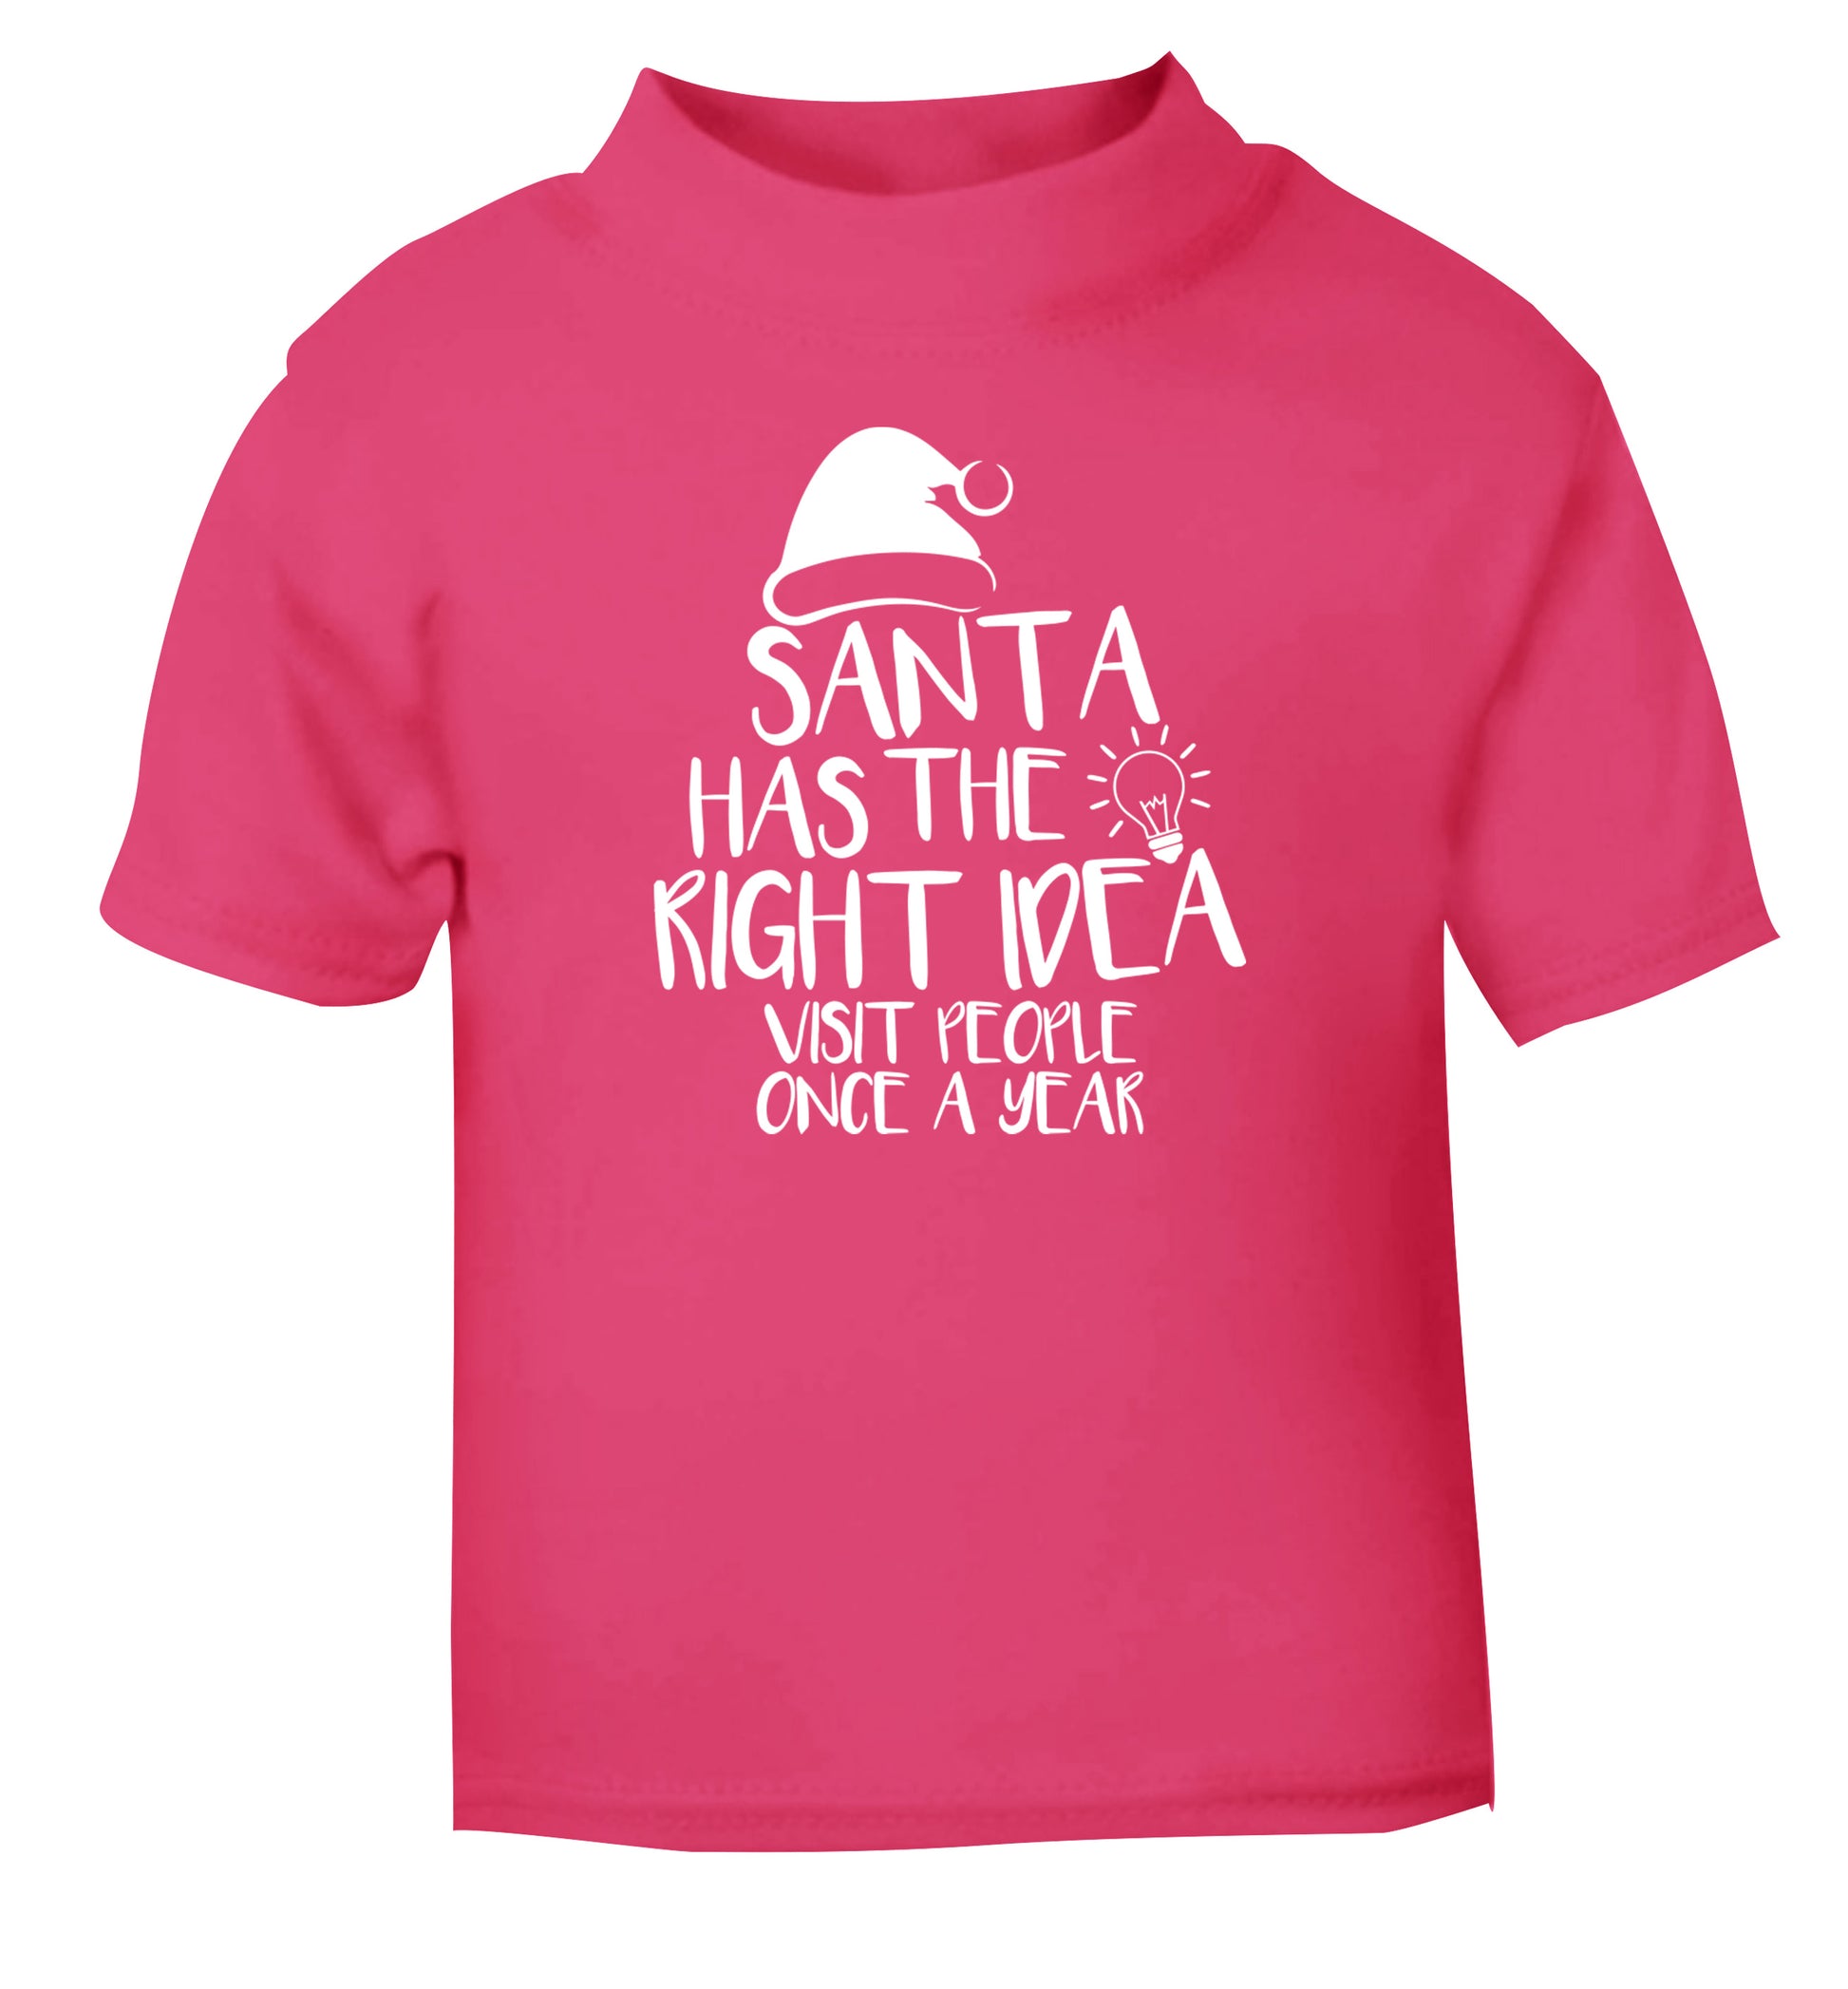 Santa has the right idea visit people once a year pink Baby Toddler Tshirt 2 Years